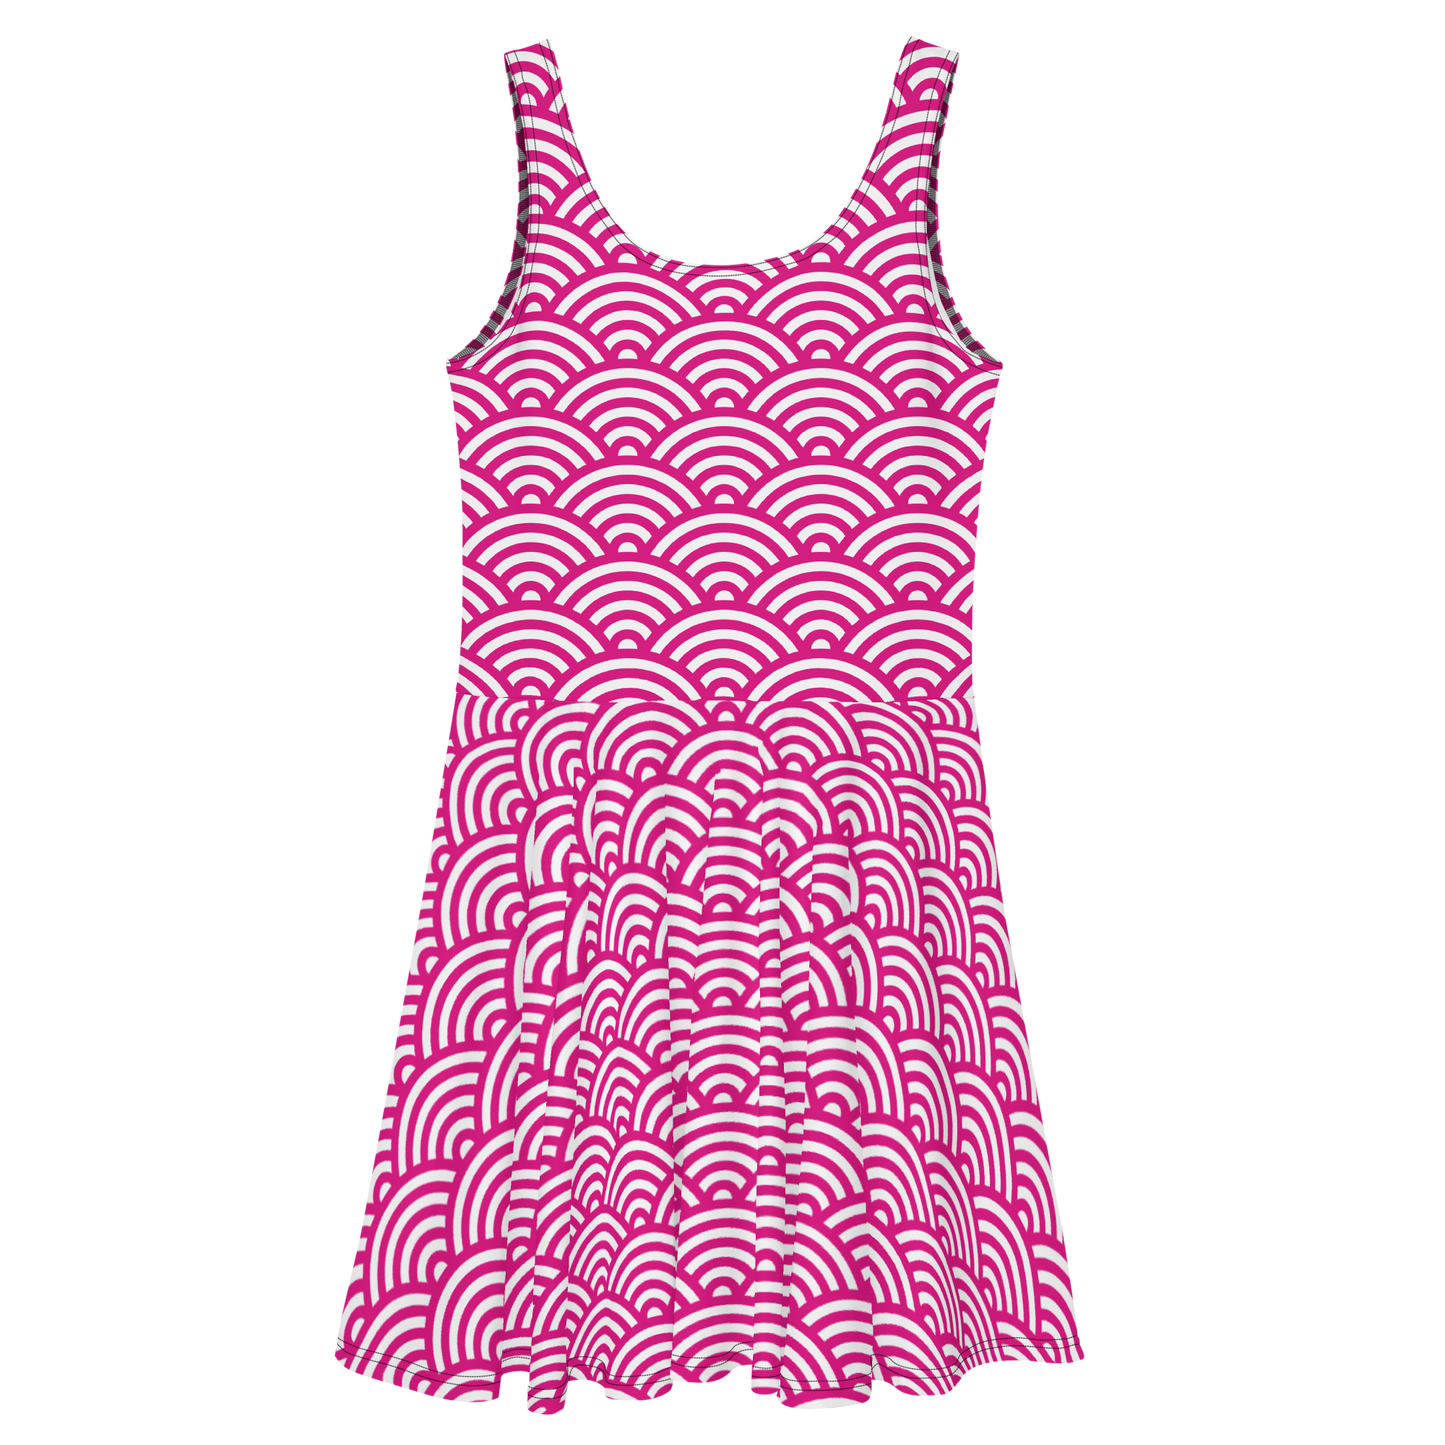 Arcs in Pink and White Skater Dress